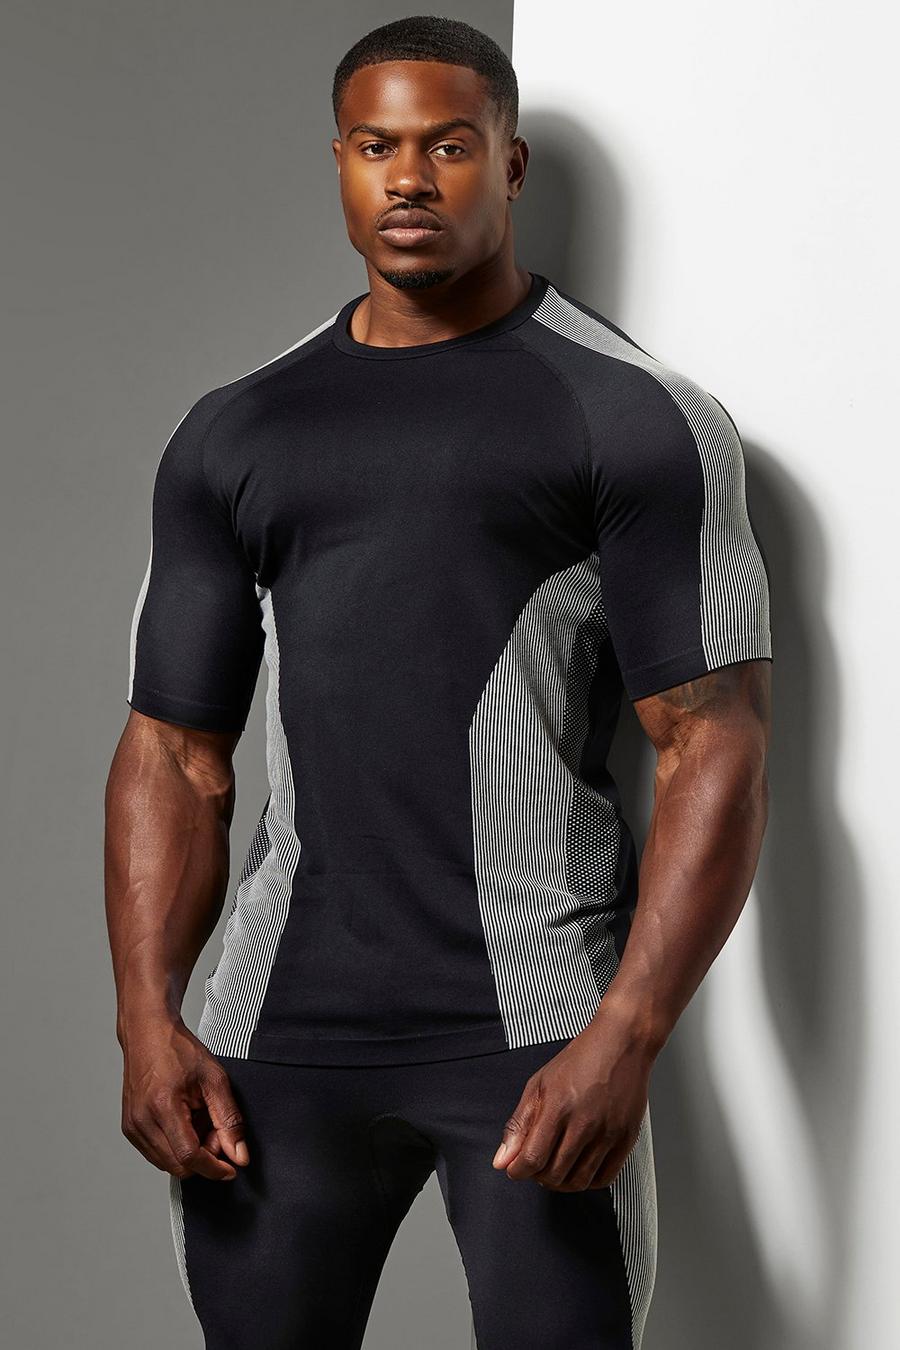 Black Muscle Fit Gym Ribbed Seamless T Shirt